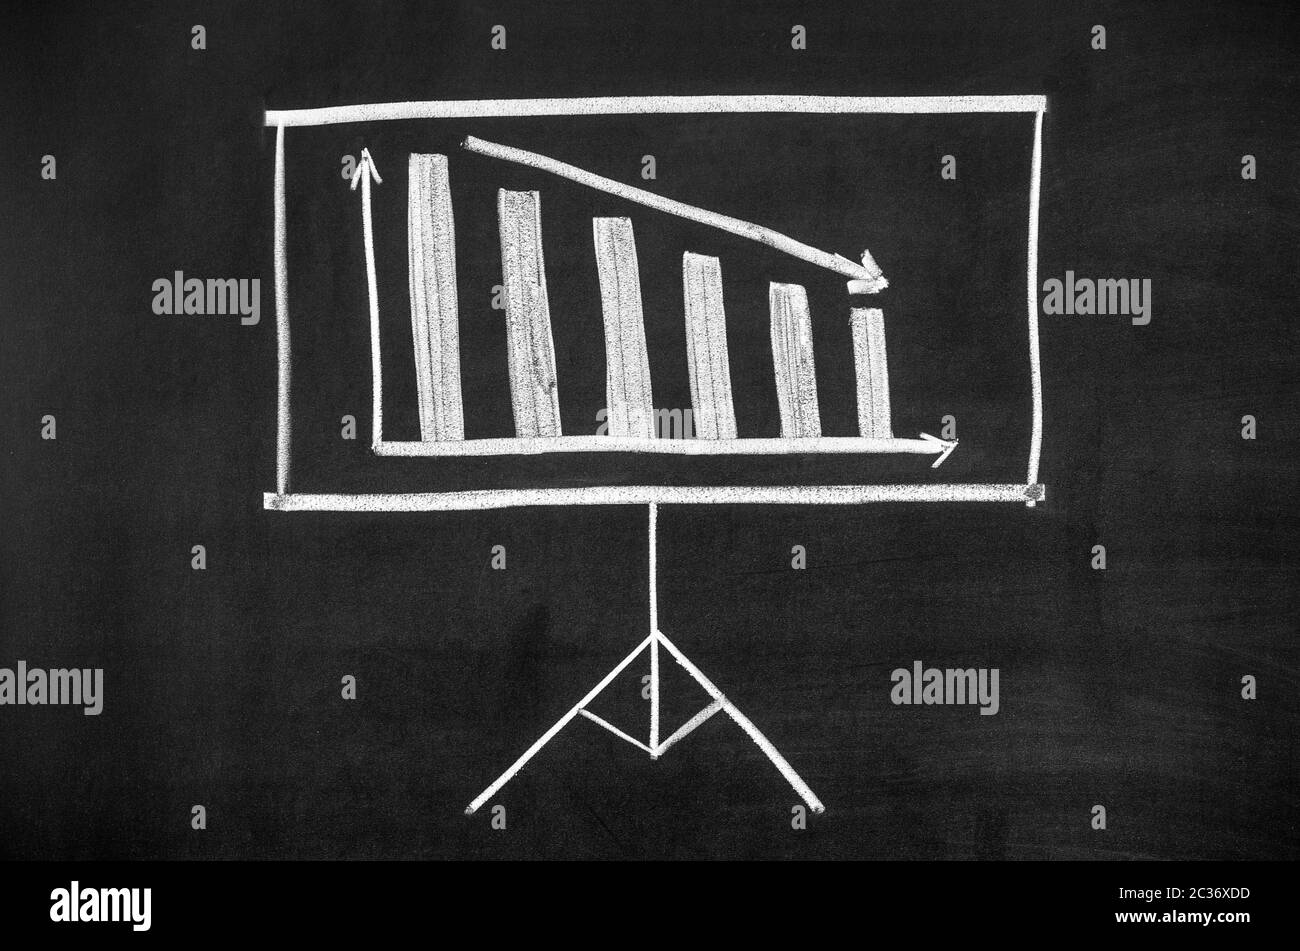 Projector screen drawn on the blackboard. The display shows the decline graph. Stock Photo